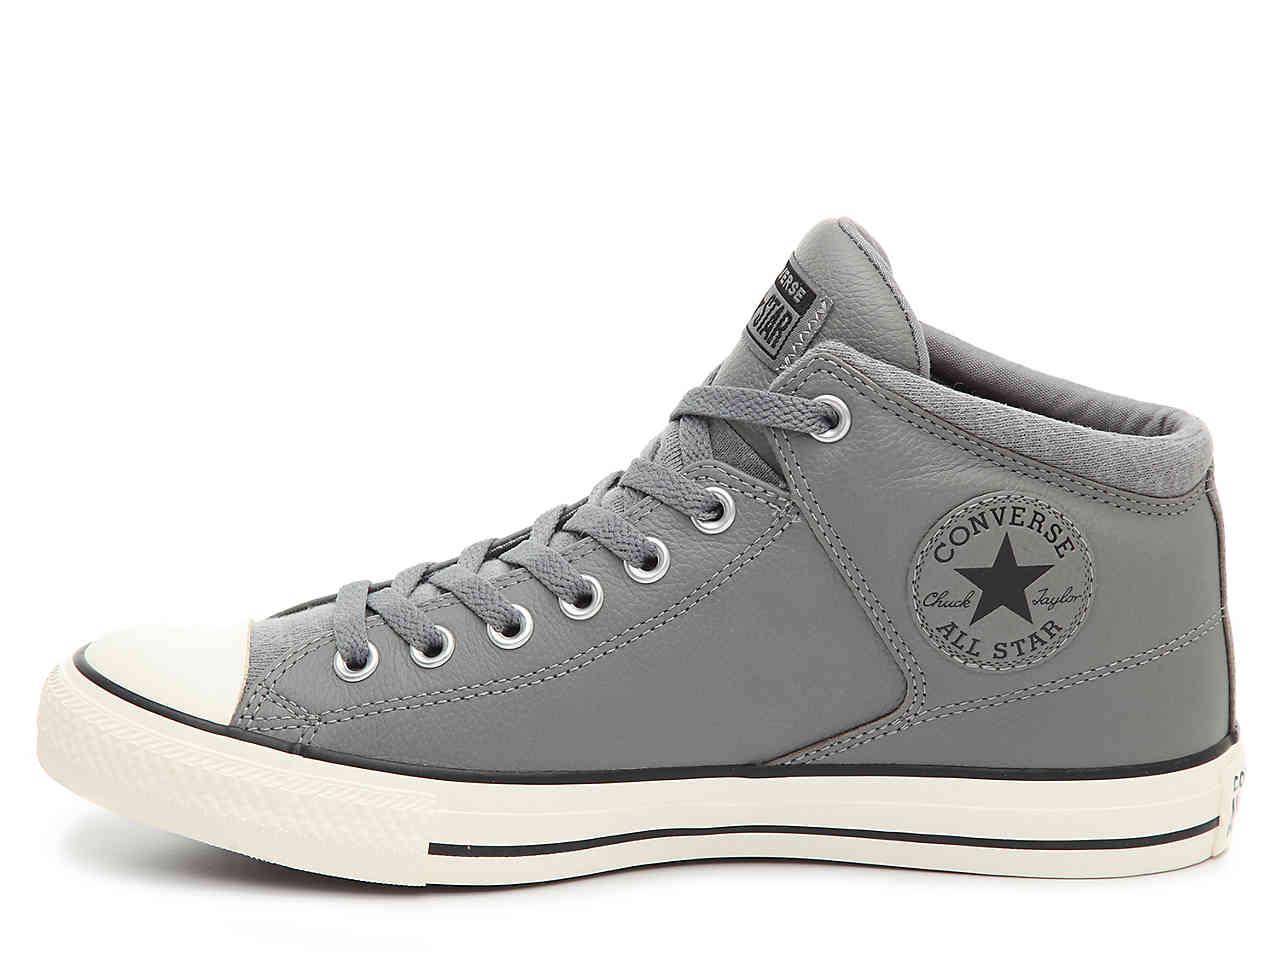 Converse Chuck Taylor All Star Hi Street Leather High Top Sneaker In Grey Gray For Men Lyst 